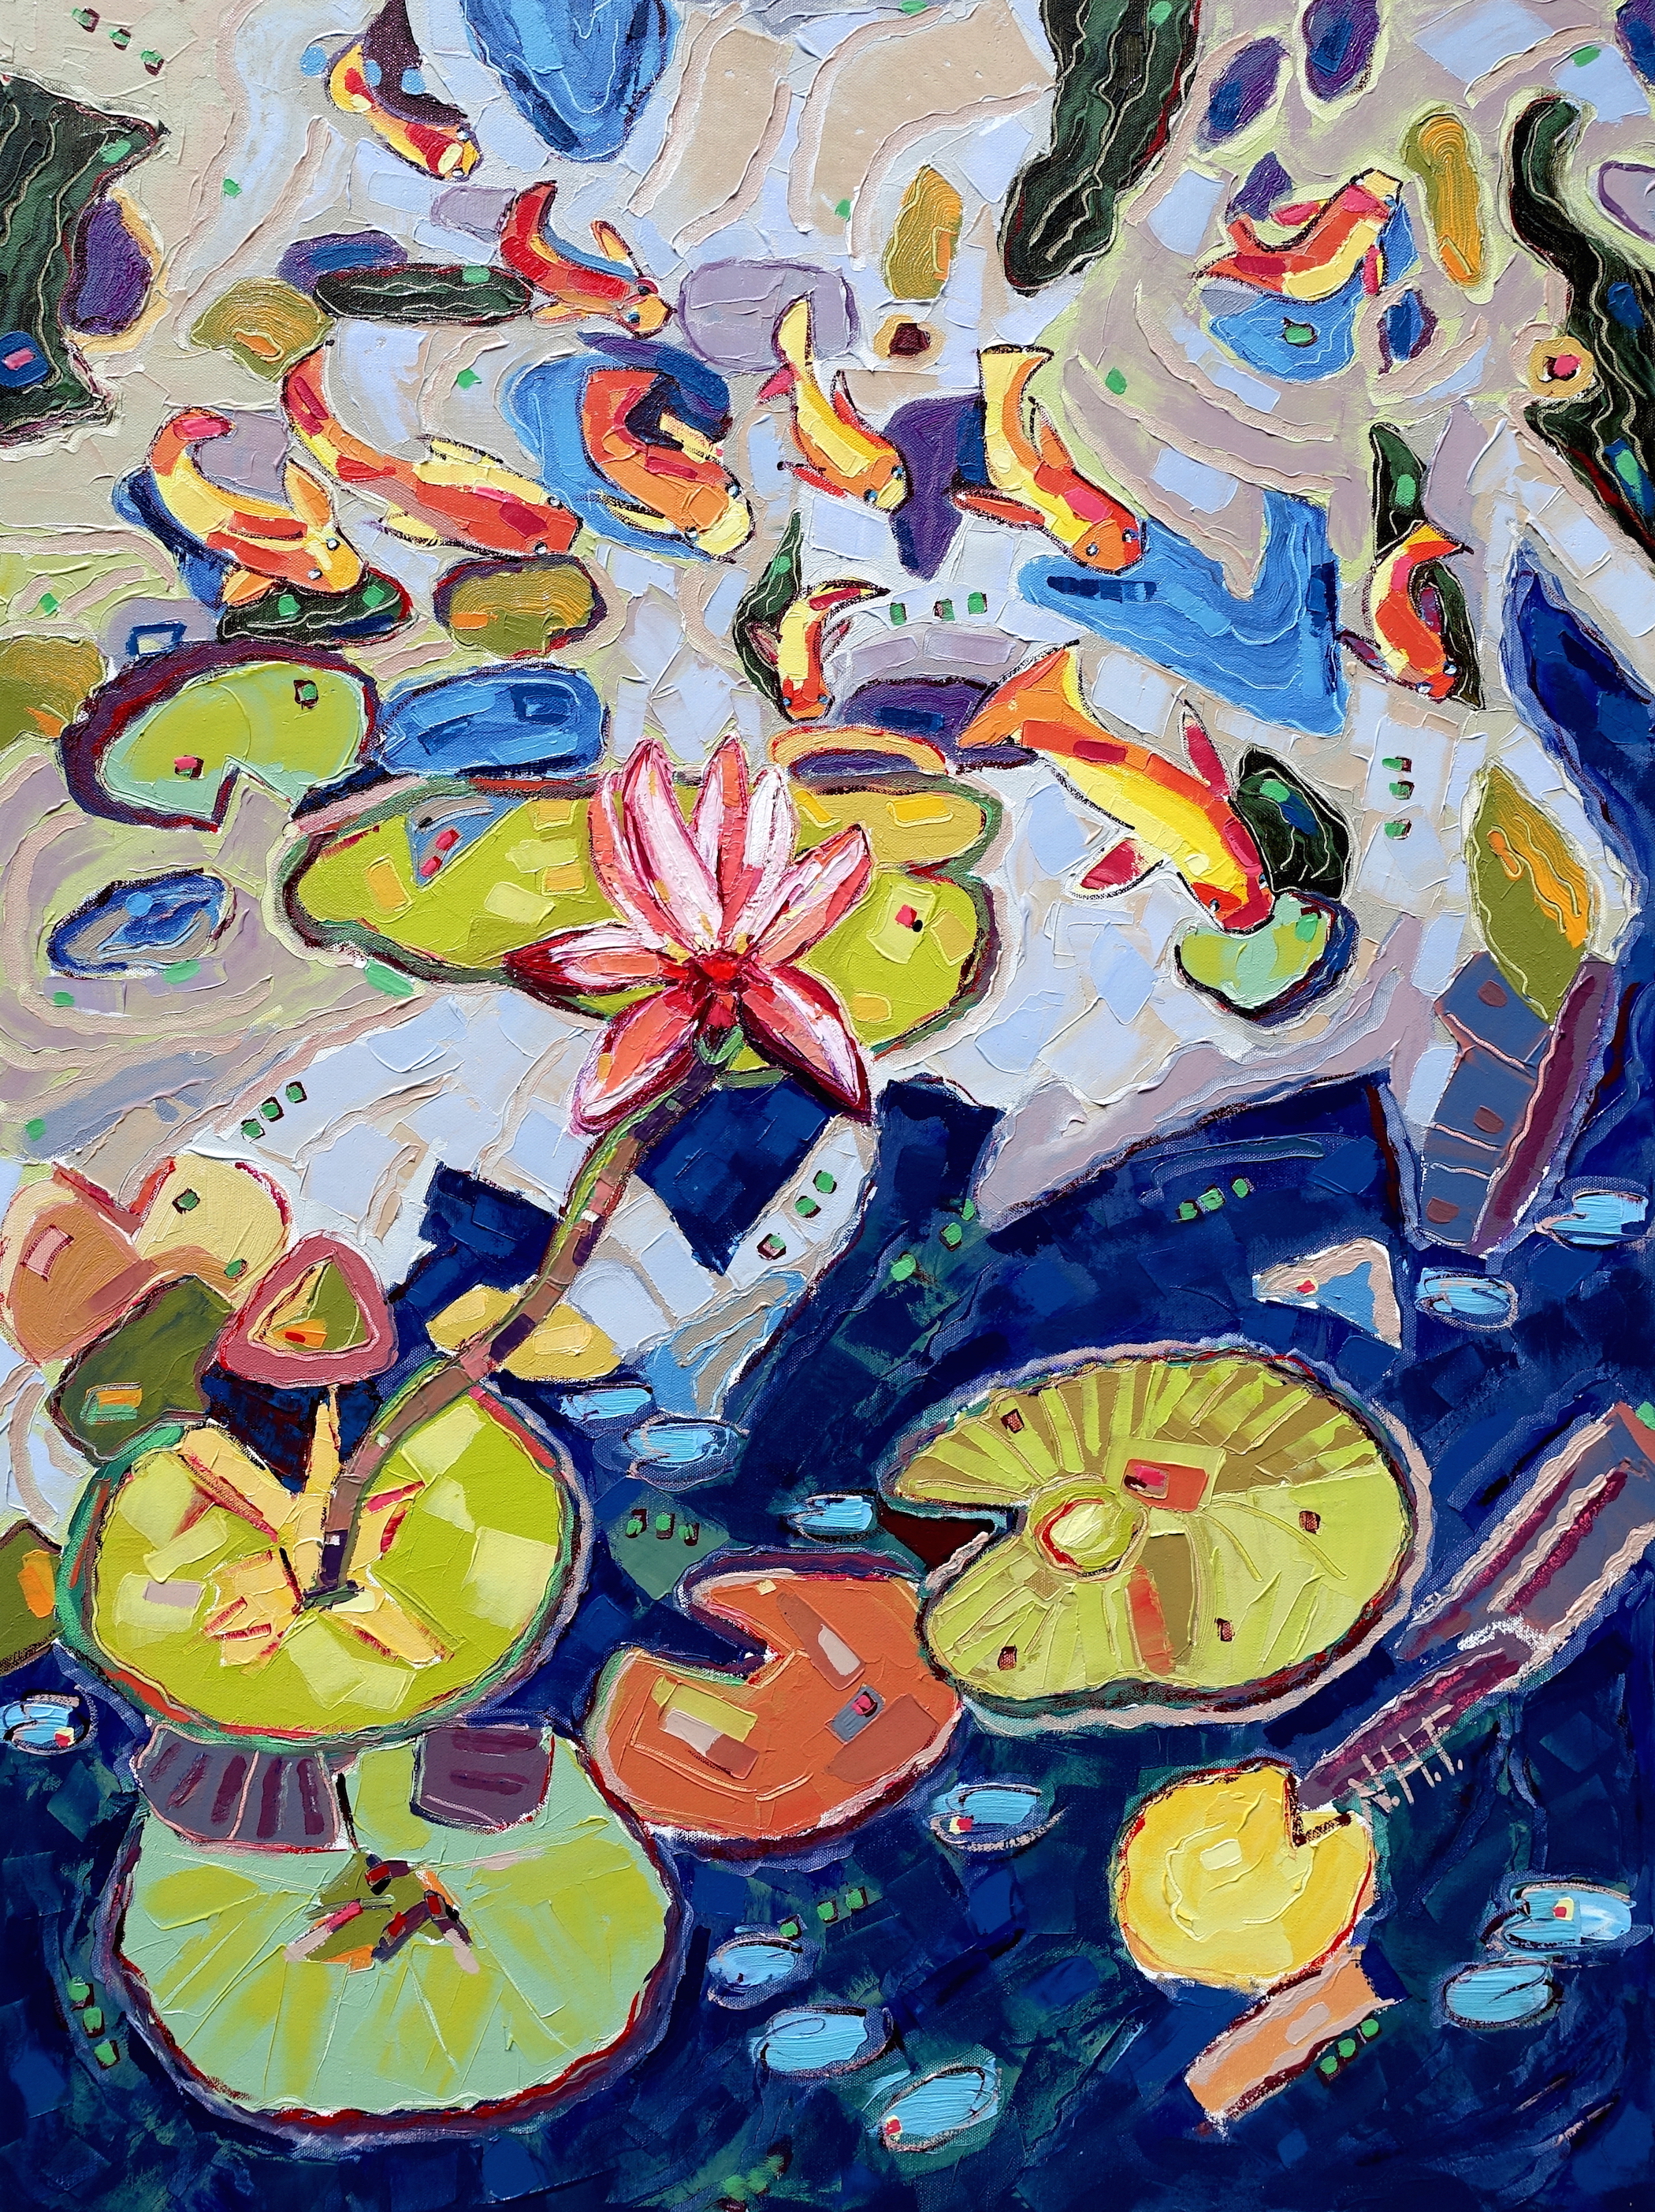   Into the Pond 3 , oil on canvas, 30x40 